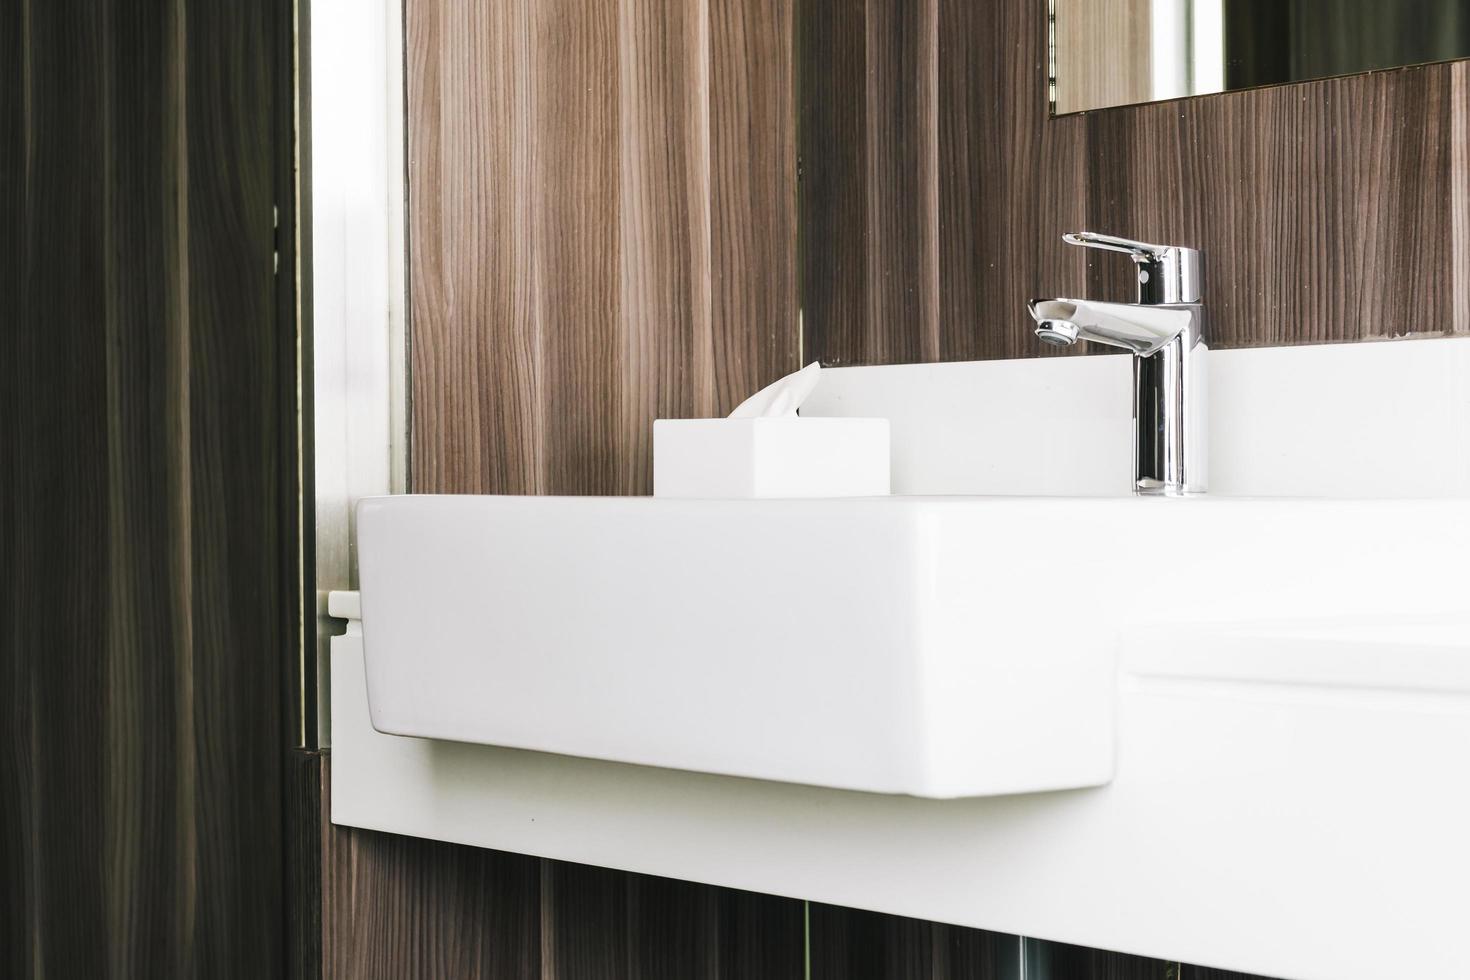 White modern sink and faucet in bathroom photo